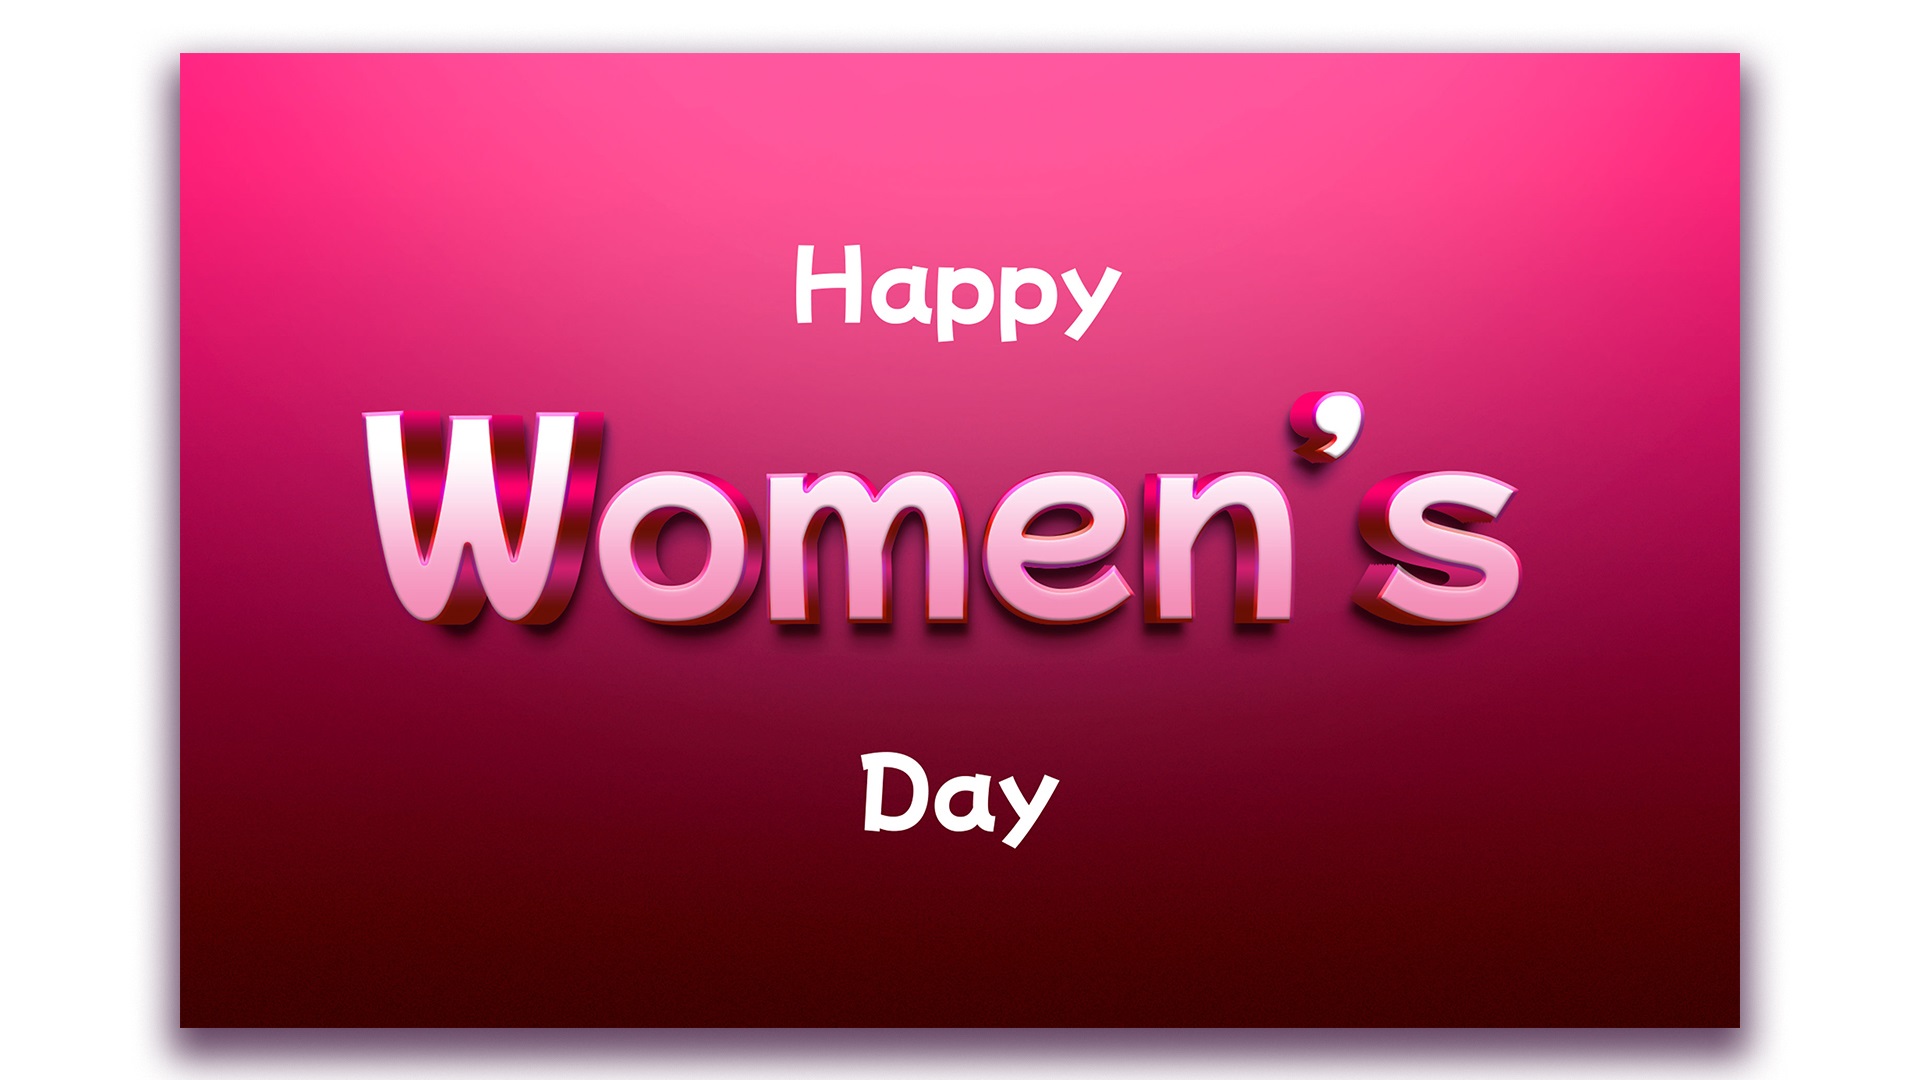 Woman's day card with the words happy women's day.